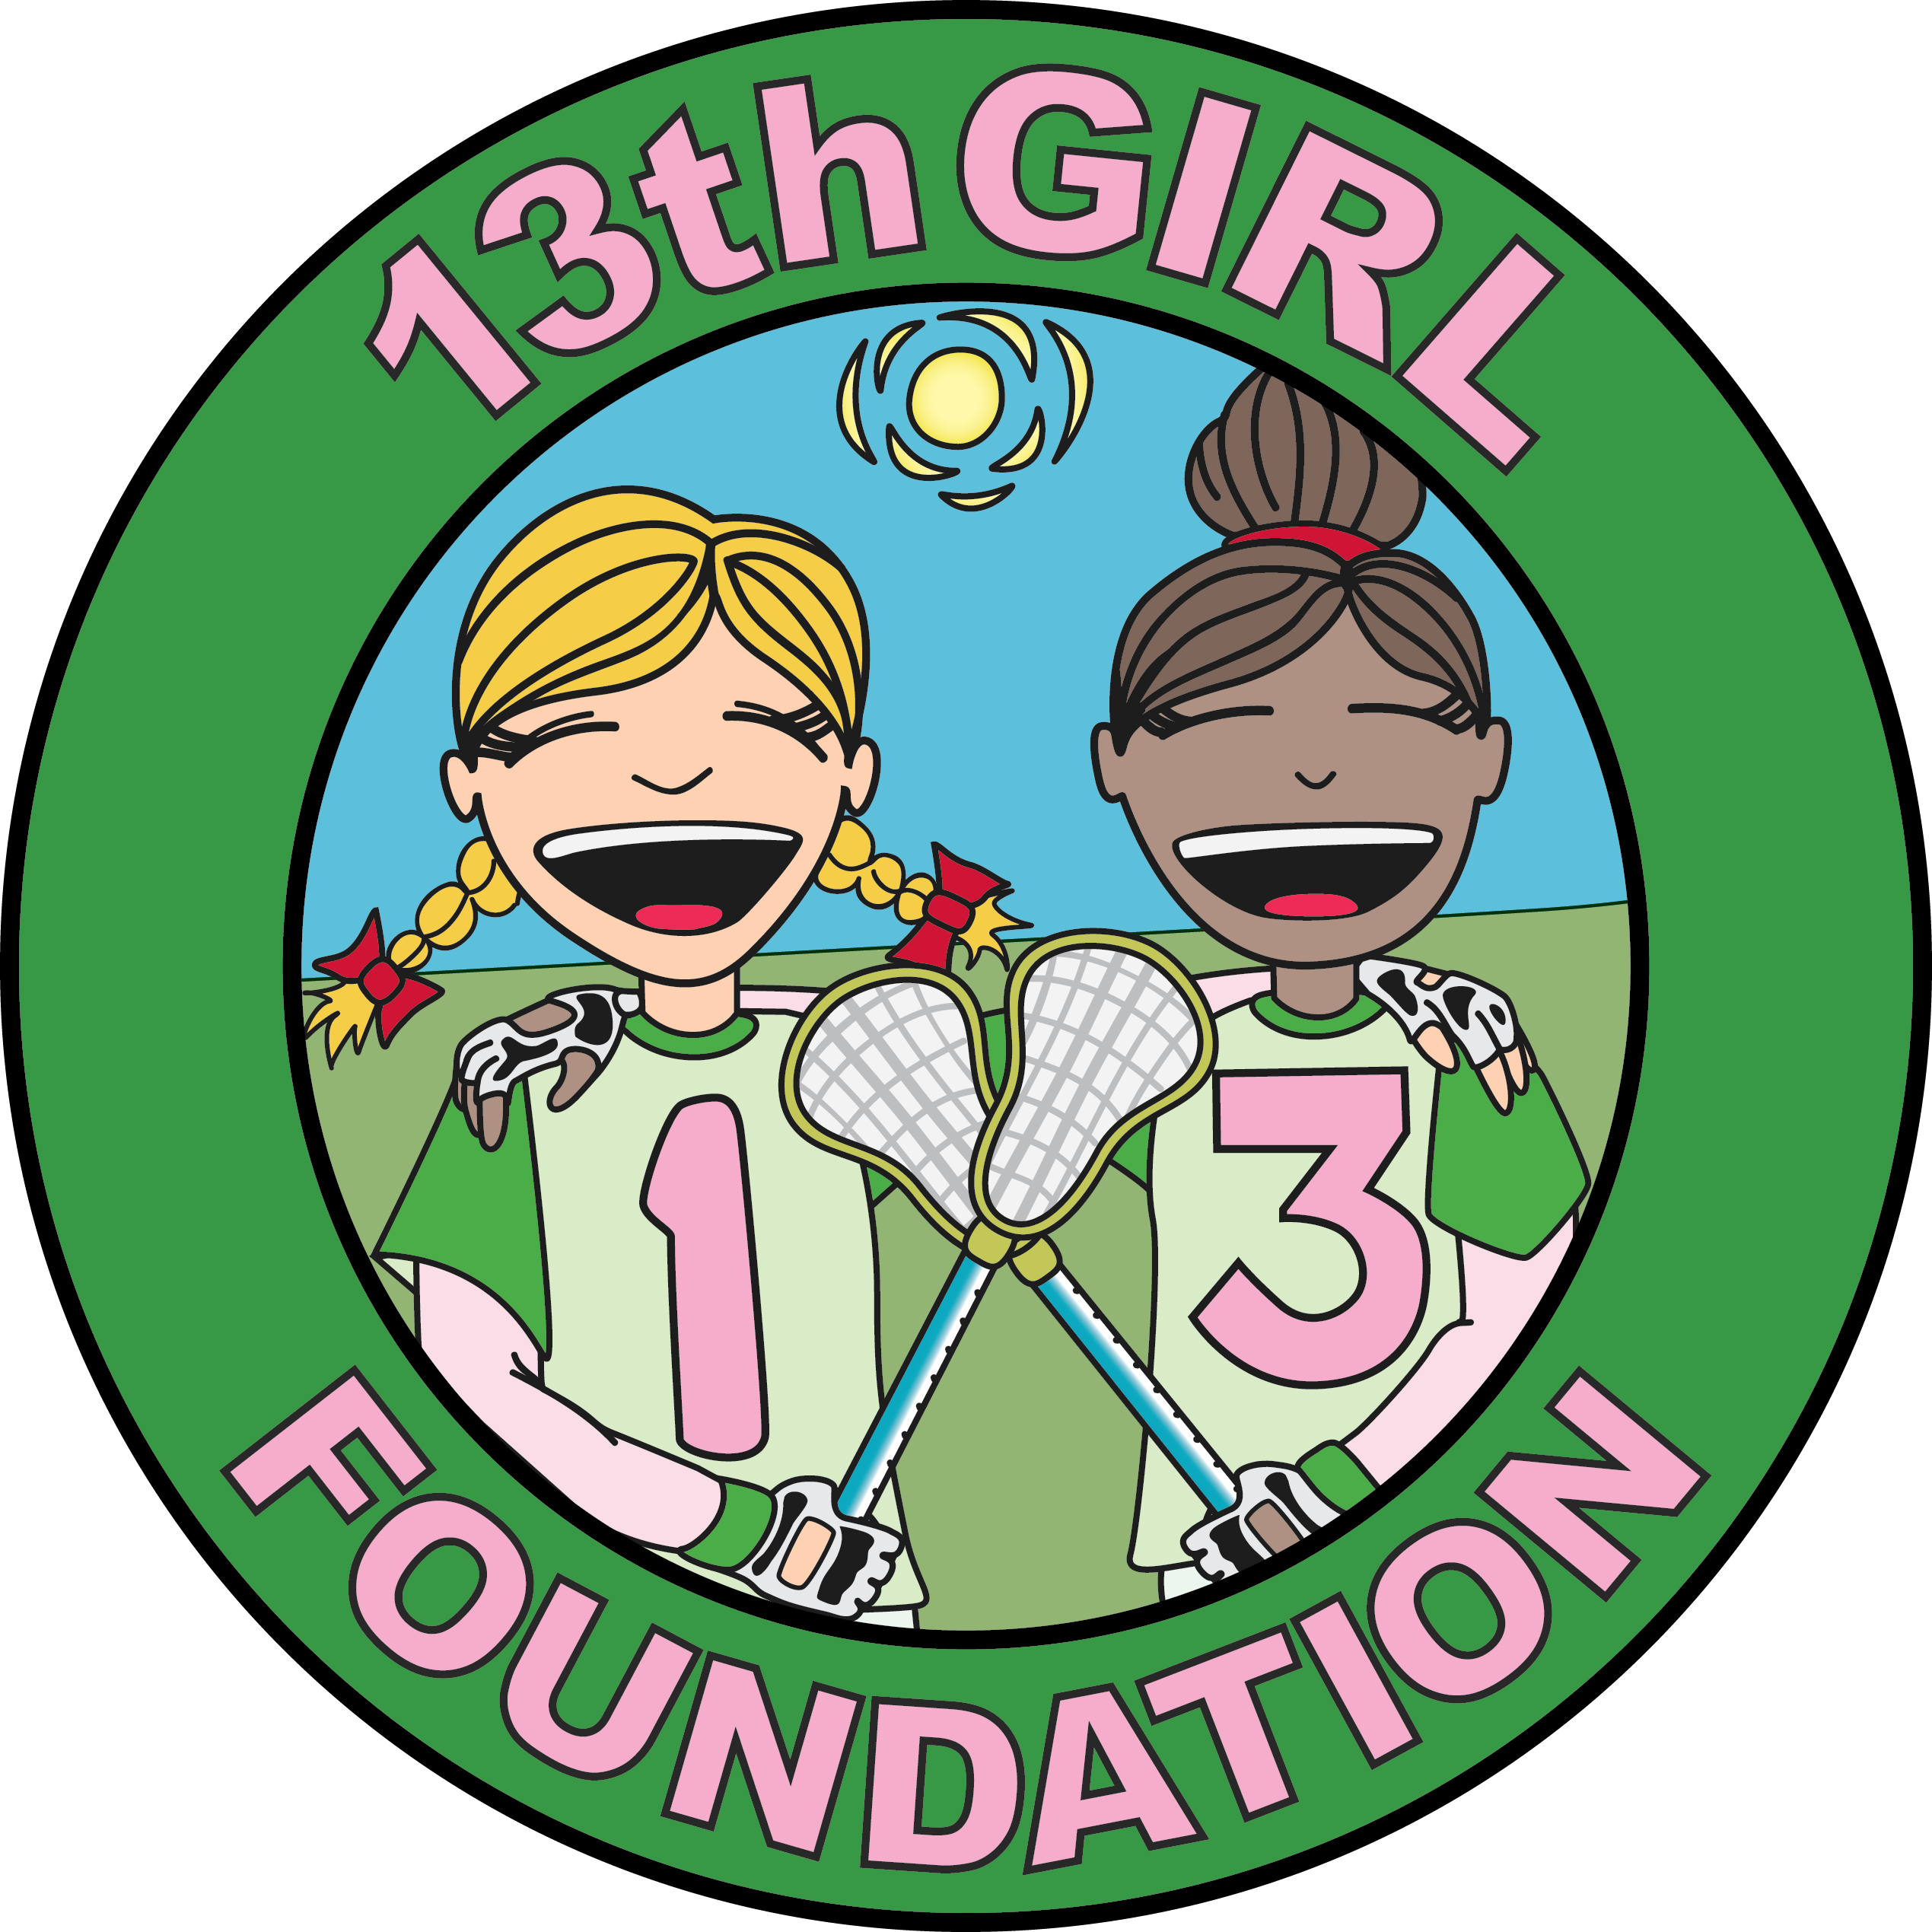 13thGirl Foundation Online Store